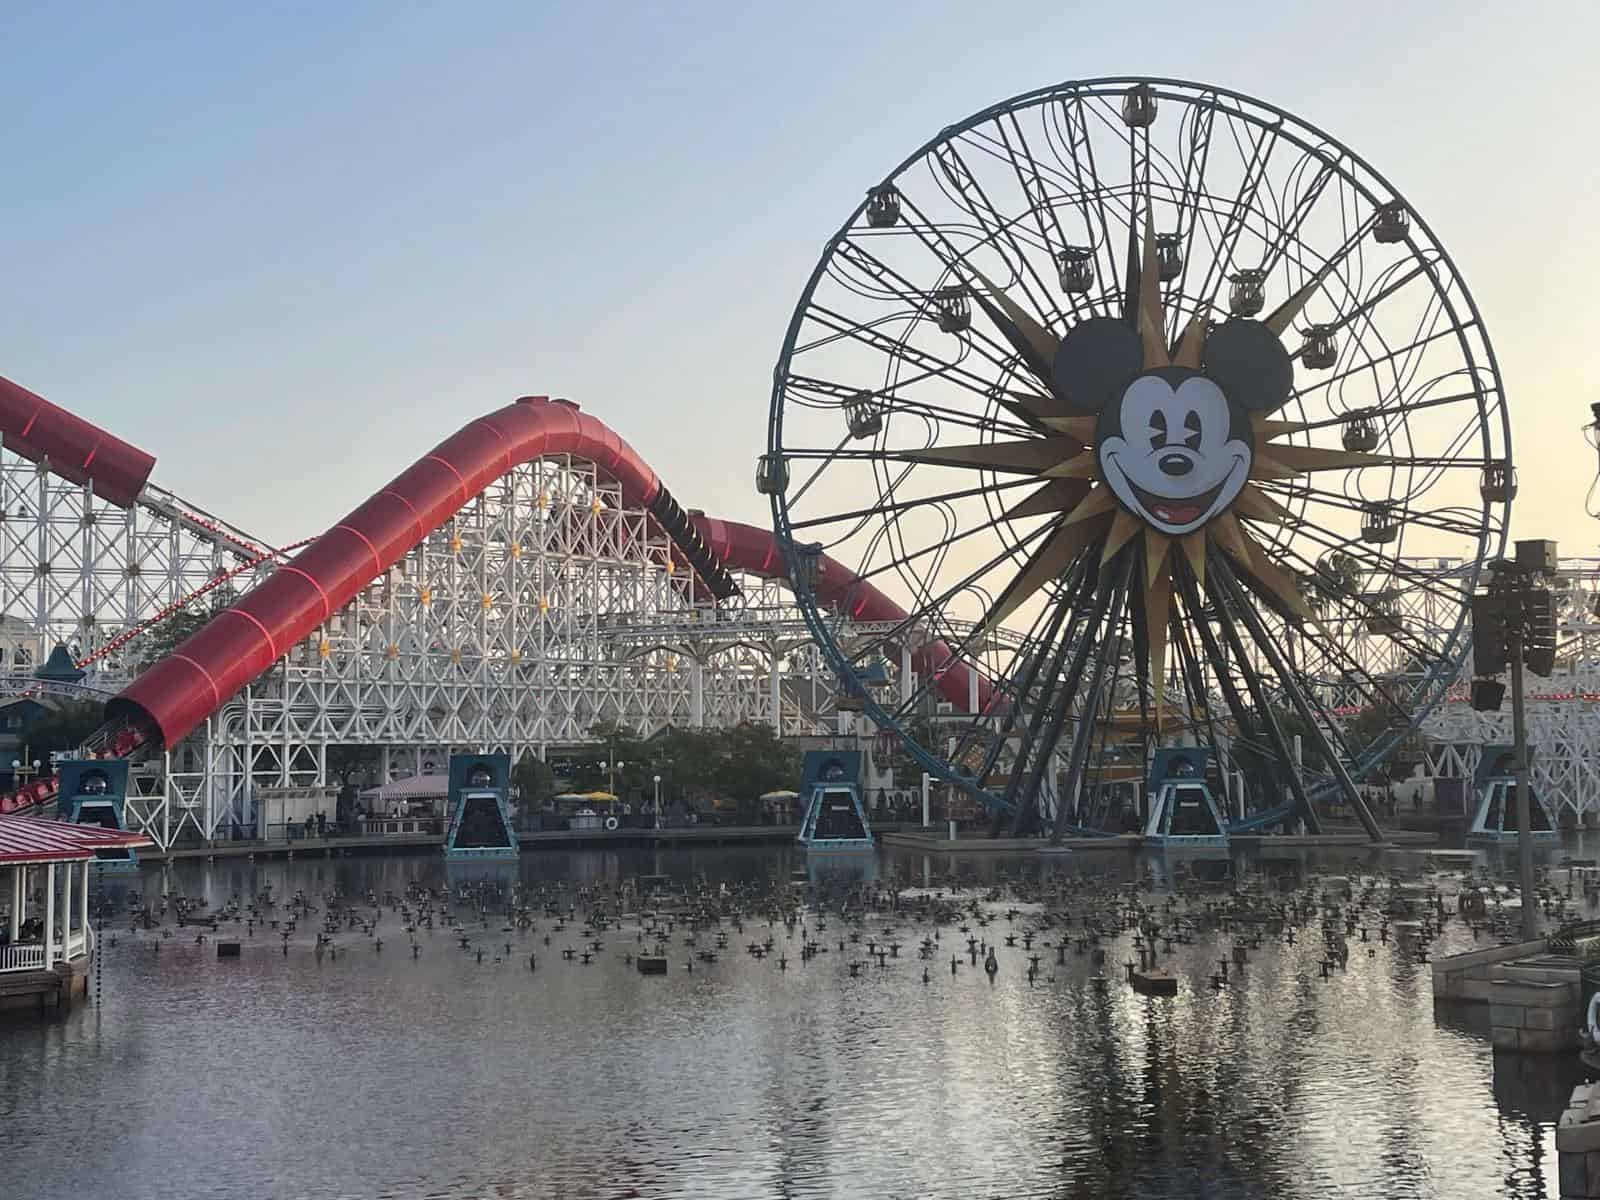 Is Incredicoaster Scary